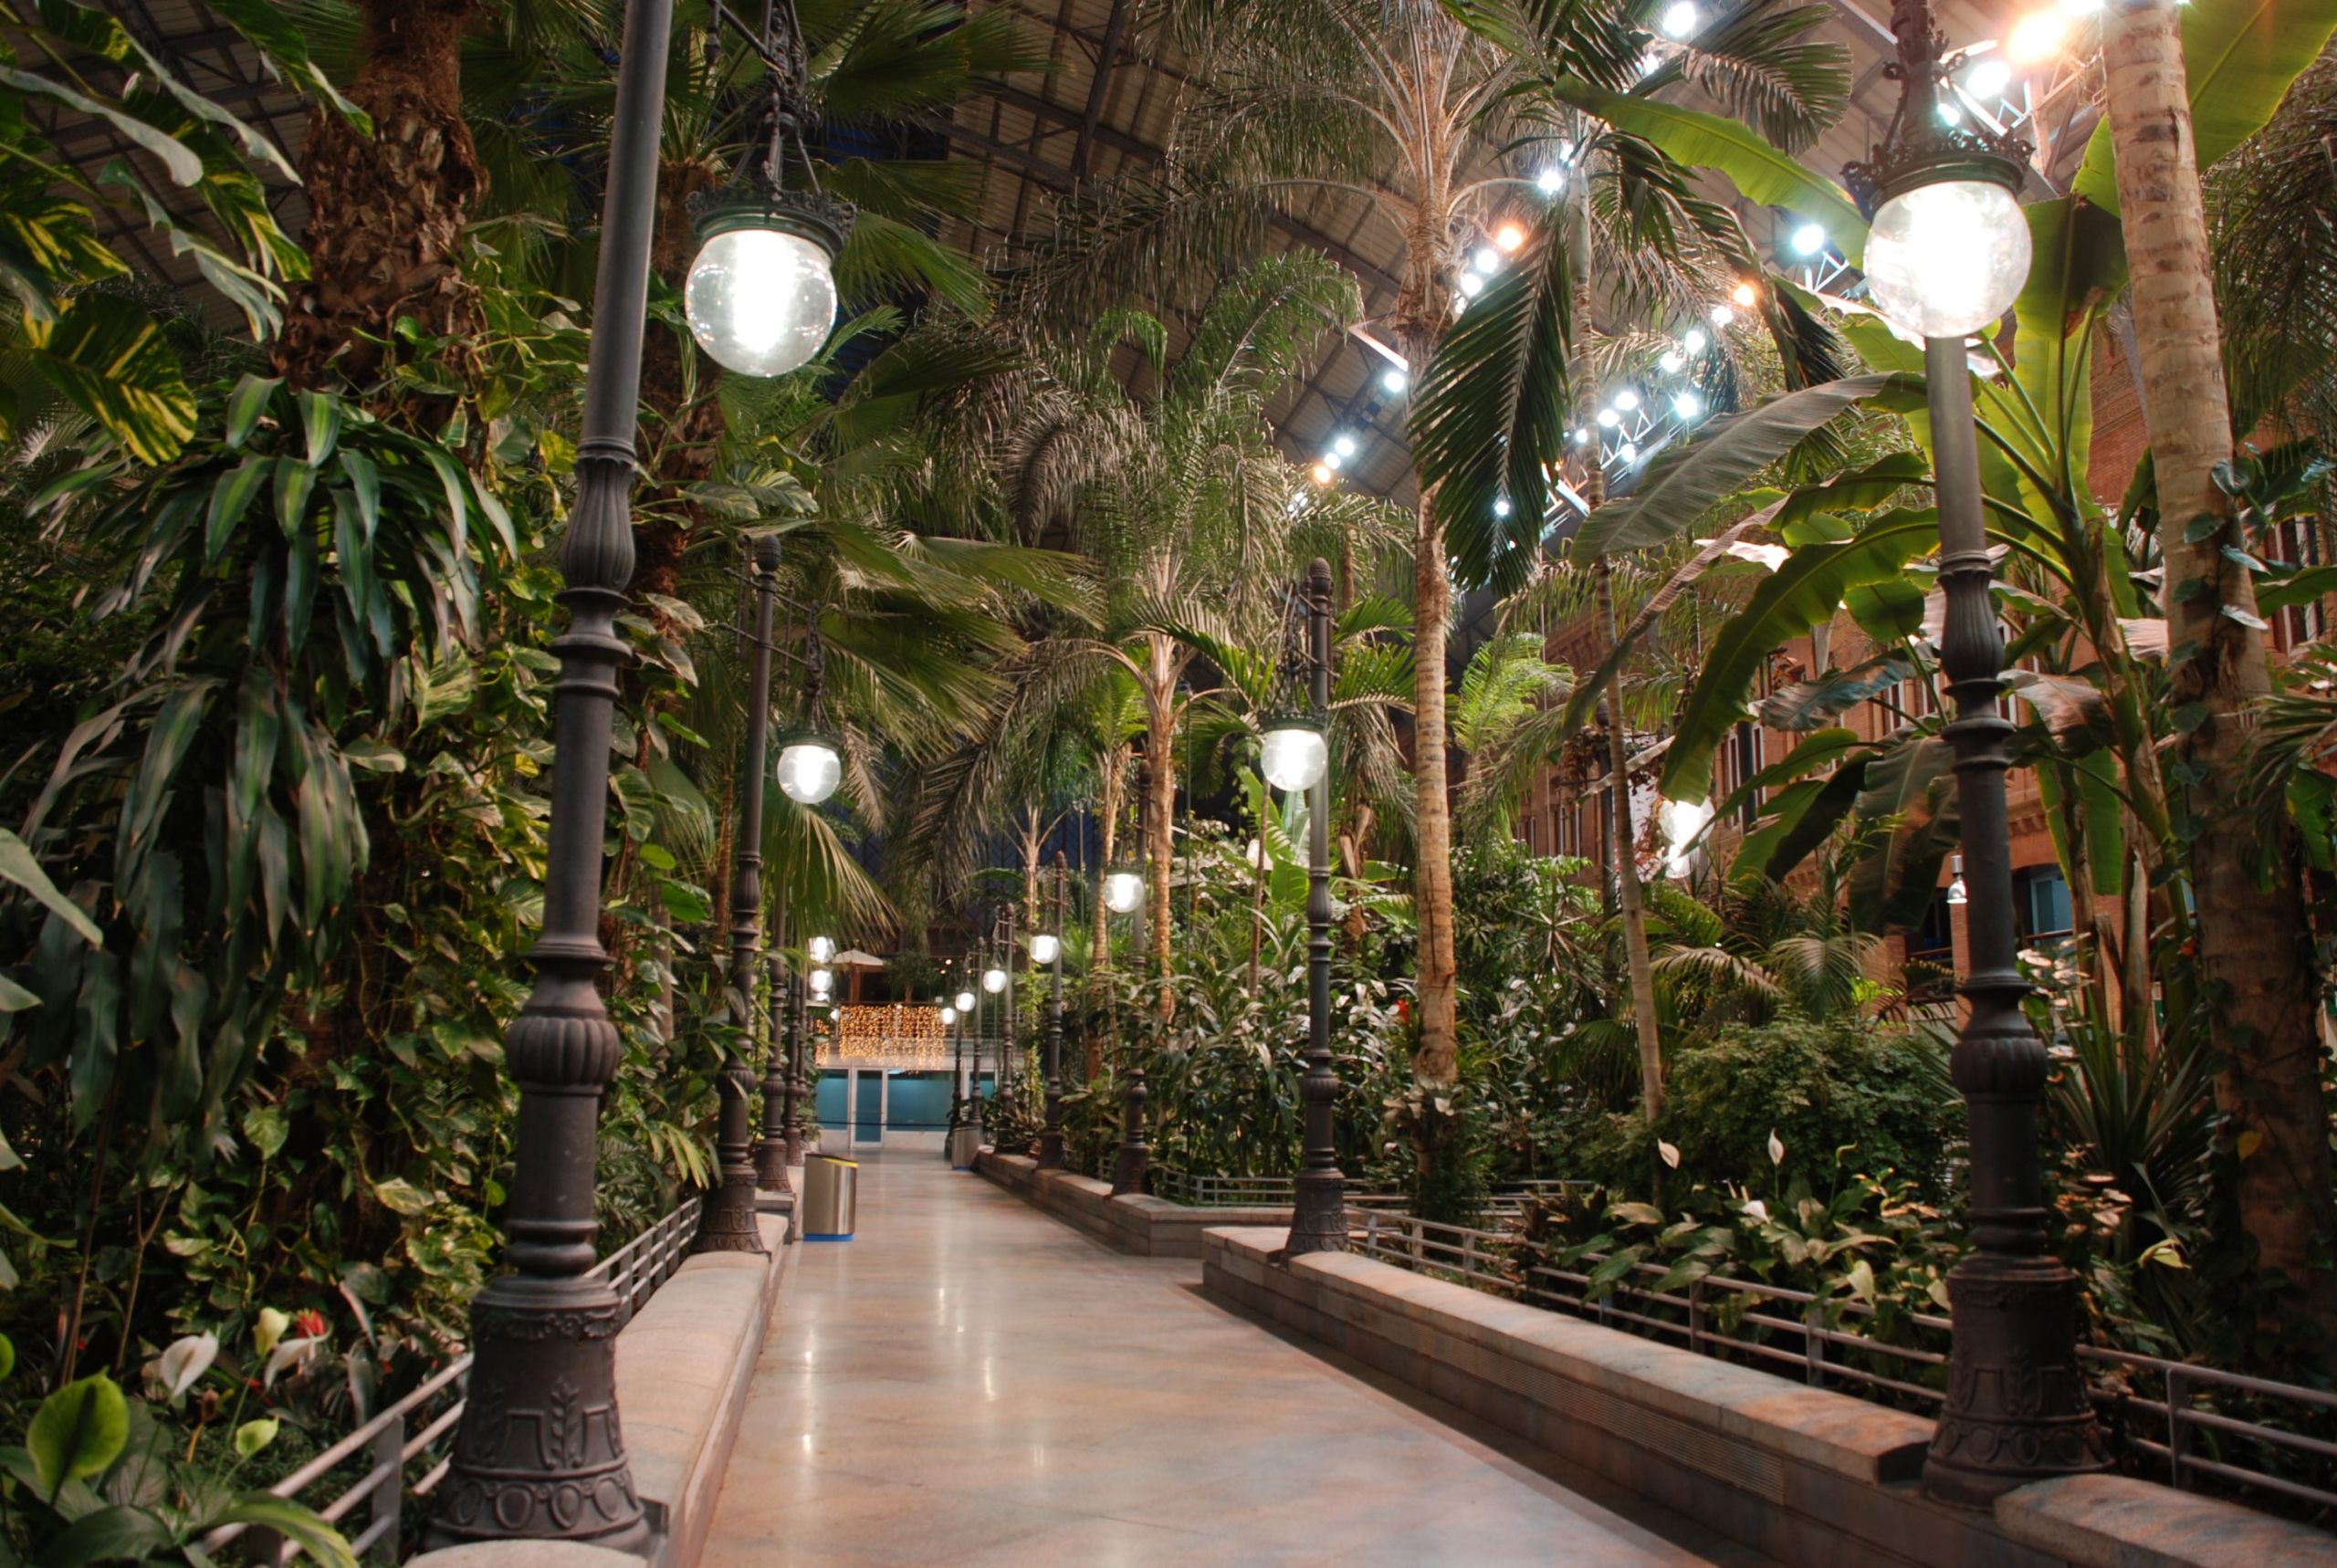 Jardin Tropical Beau atocha Station Greenhouse Garden In Madrid 23 Reviews and